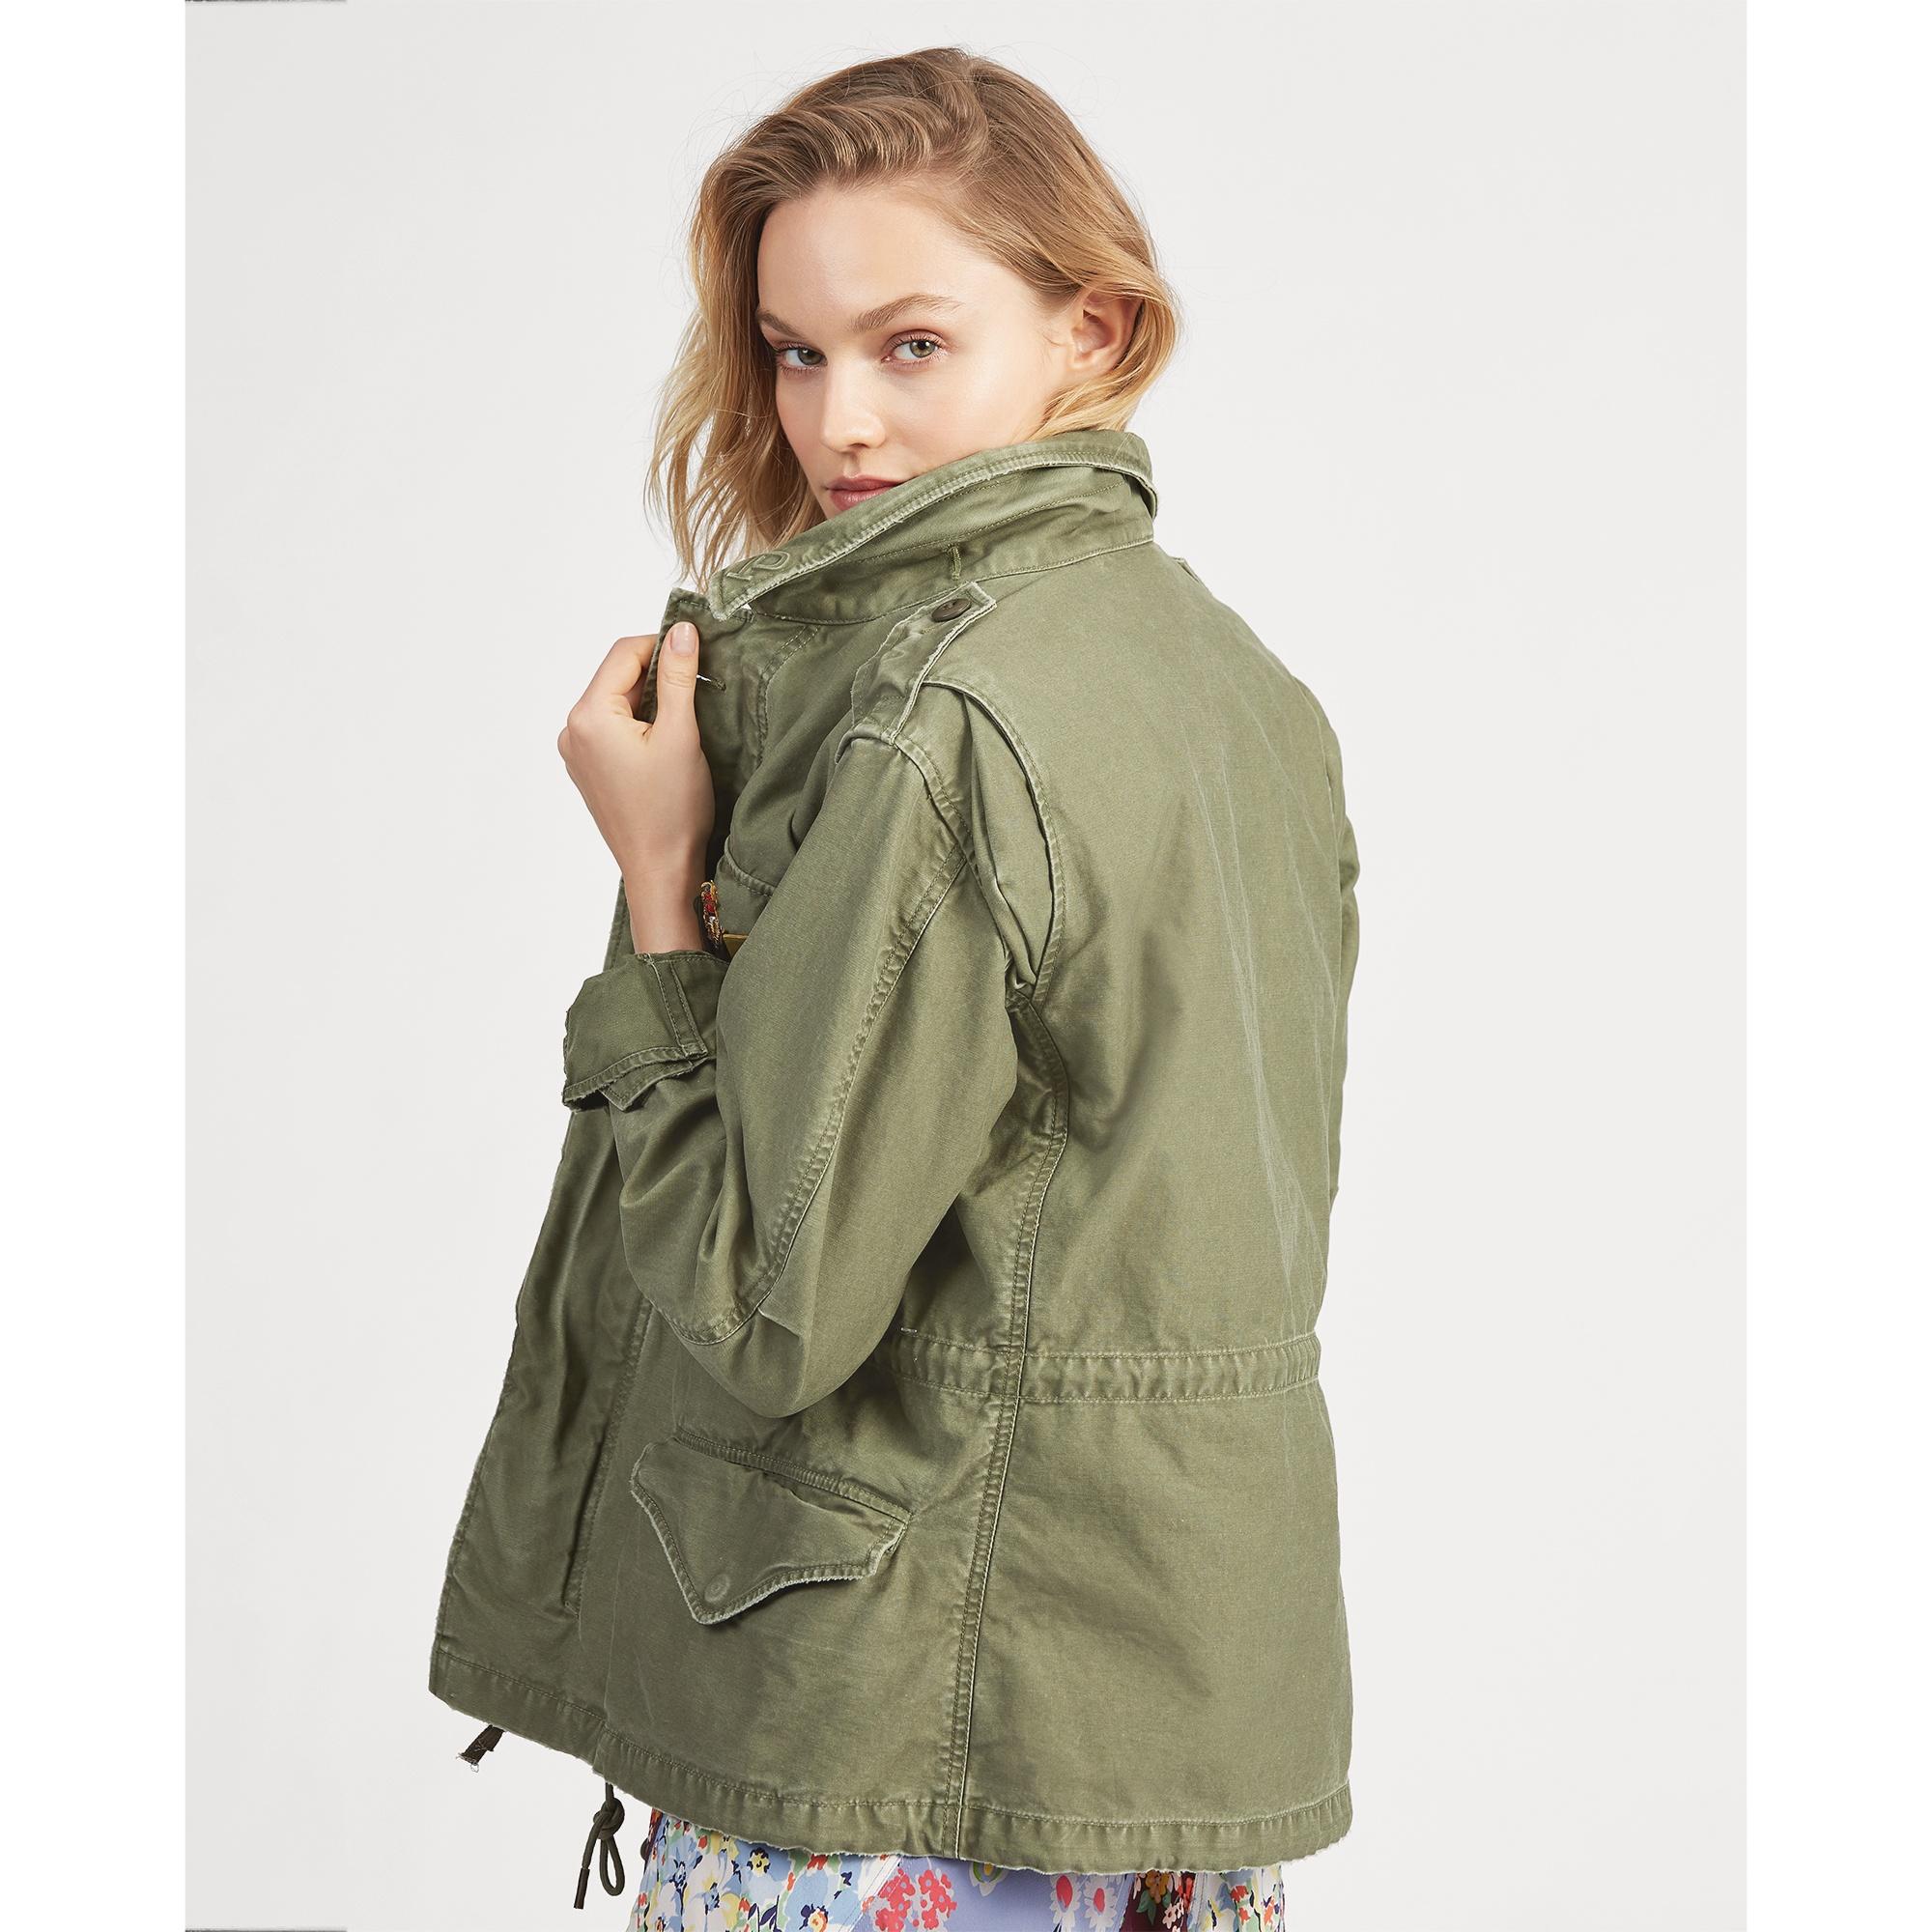 Polo Ralph Lauren Cotton Twill Military Jacket in Army Olive (Green) - Lyst